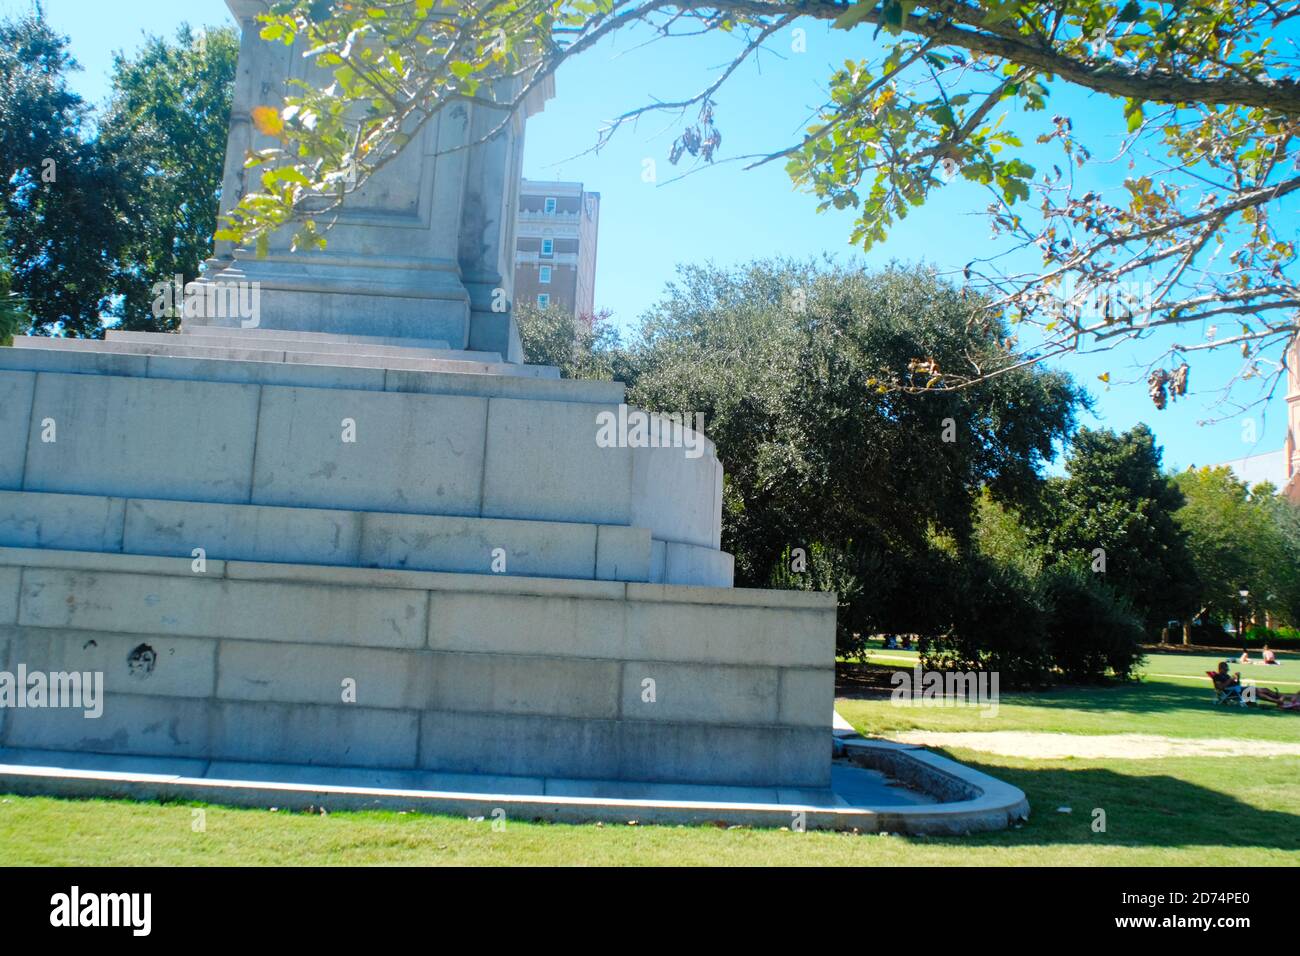 Southern Railway Offices, HS Hunley Civil War Sub, Best Friend of Charleston 1842 train, Plants, Base of Stature for Calhoun Was Politically Removed. Stock Photo